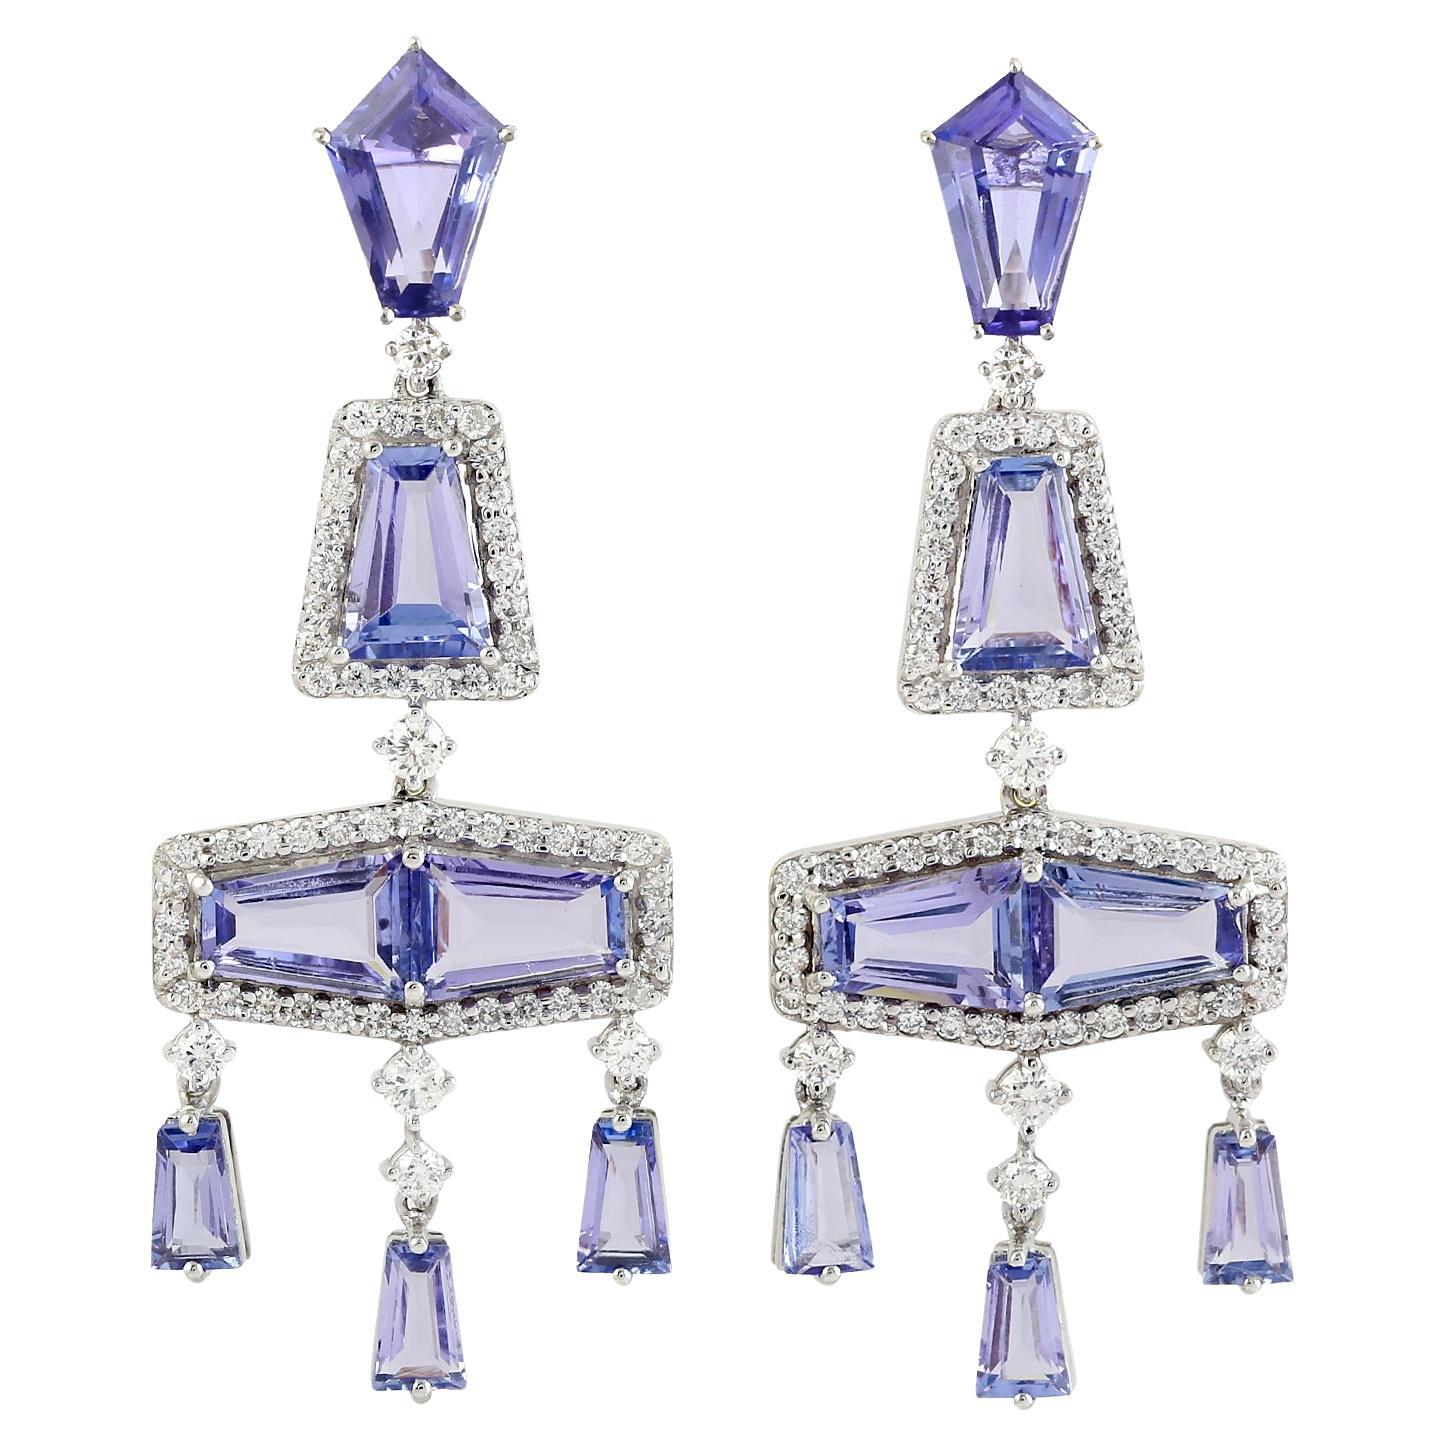 Tanzanite Chandelier Earrings With Diamonds made In 18k White Gold For Sale